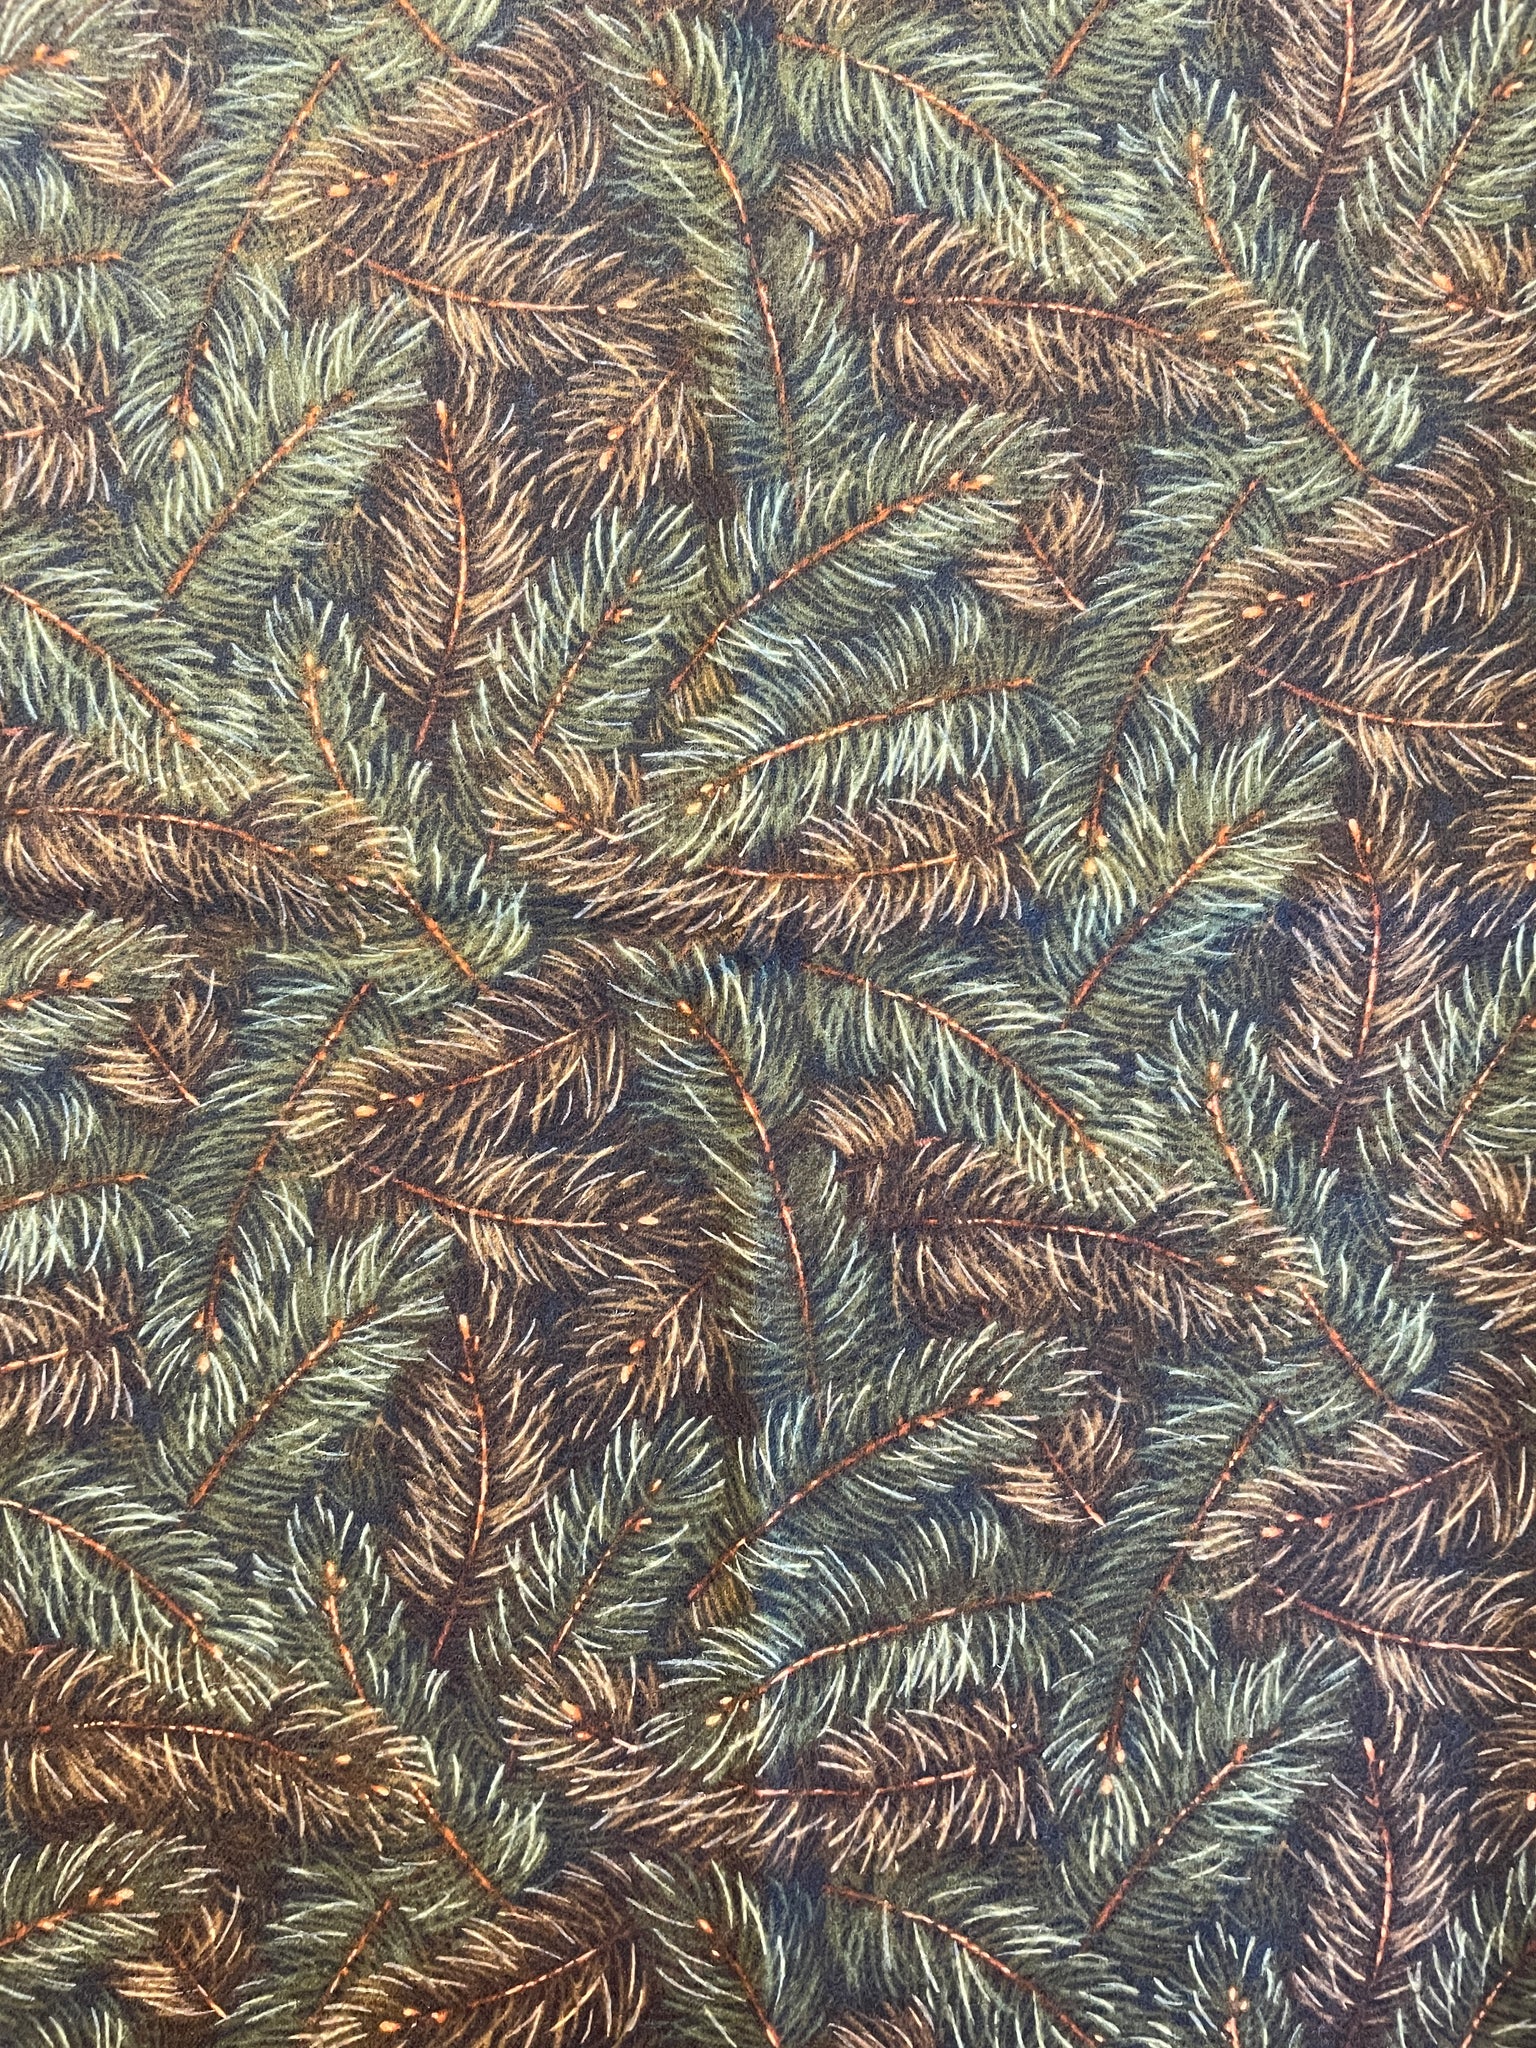 SALE 1/2 YD Cotton Flannel Remnant - Dark Green with Pine Branches